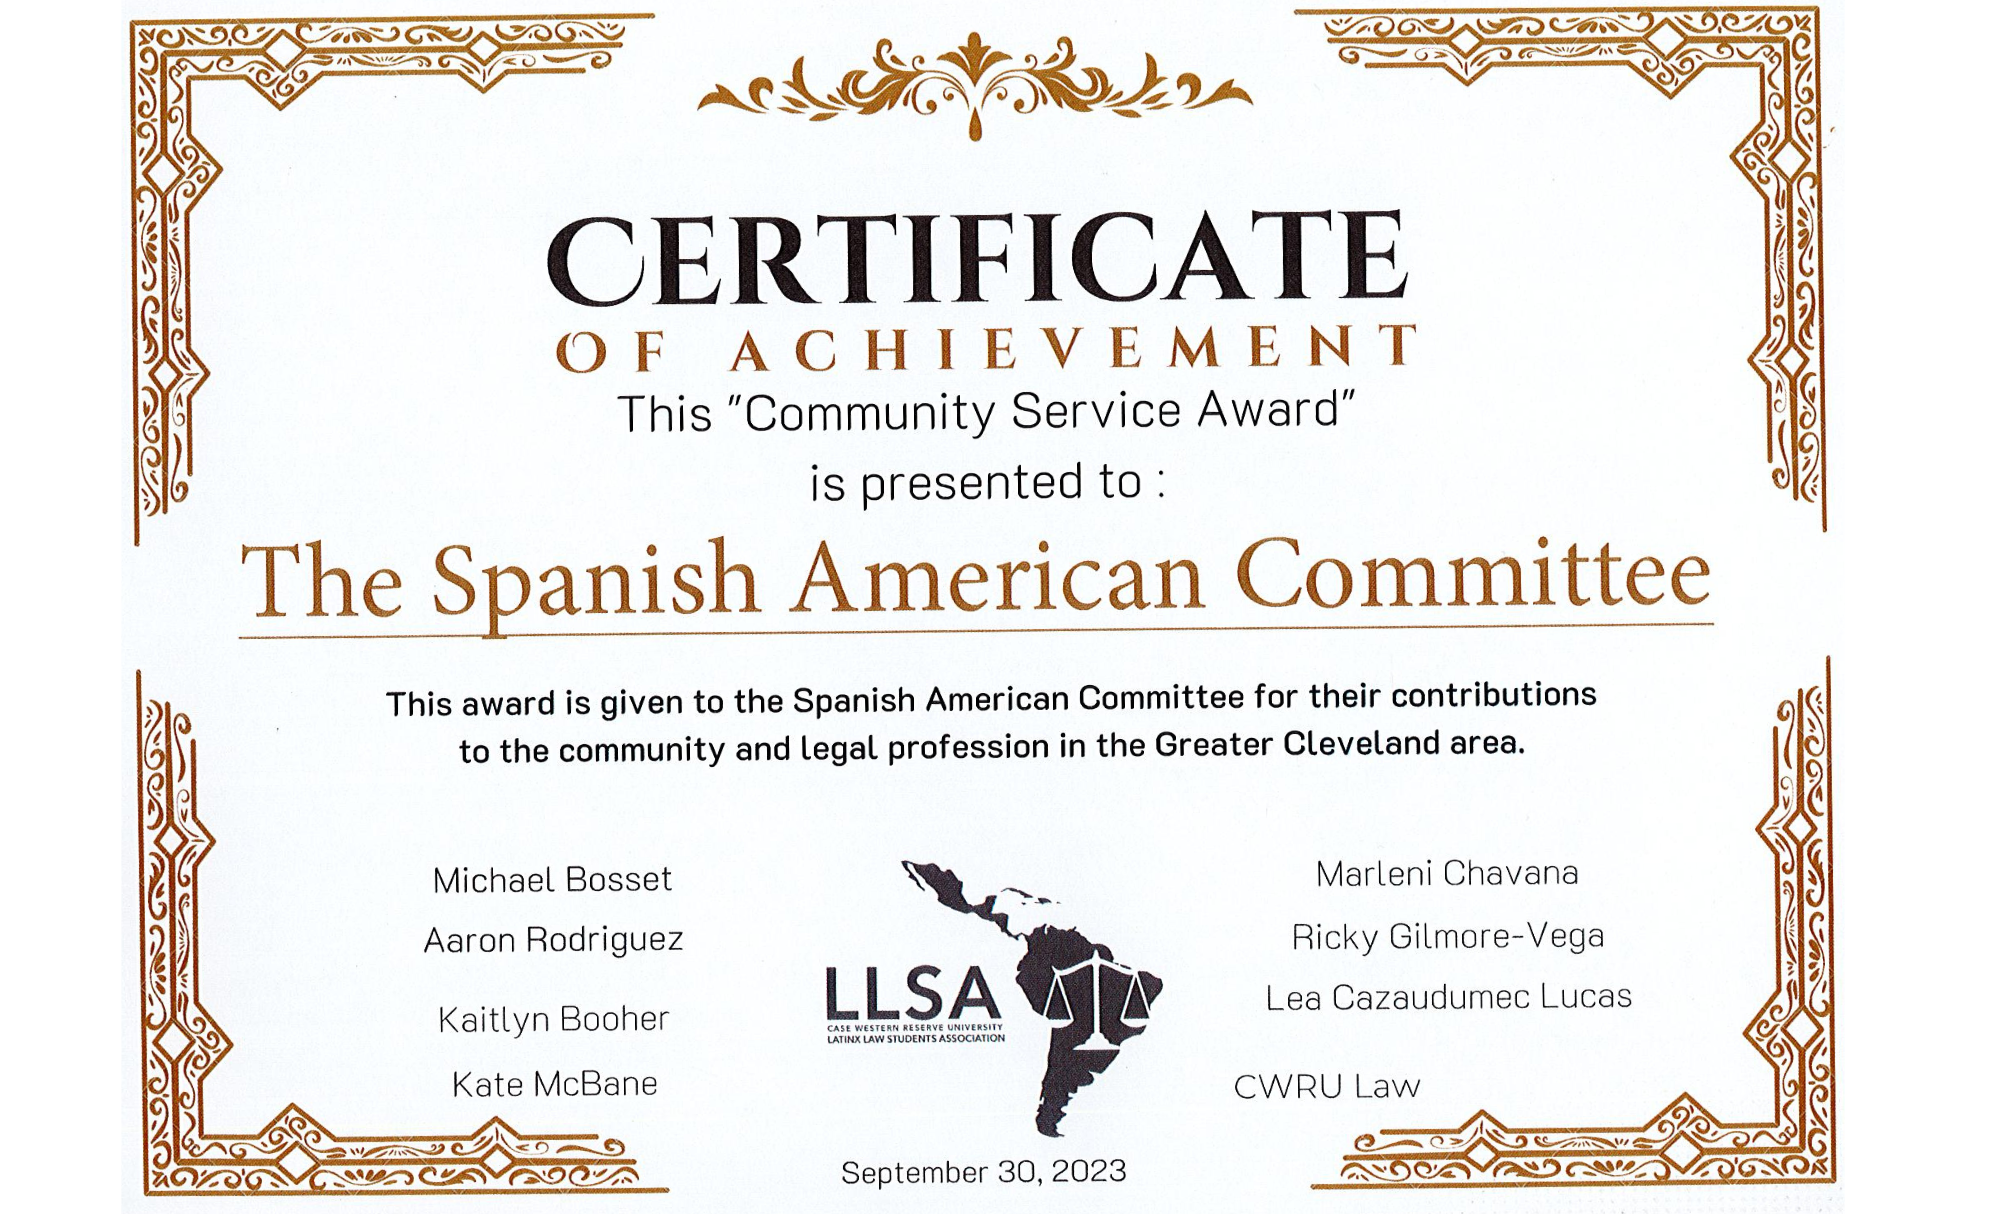 Certificate of Achievement for Community Service Award presented to the Spanish American Committee